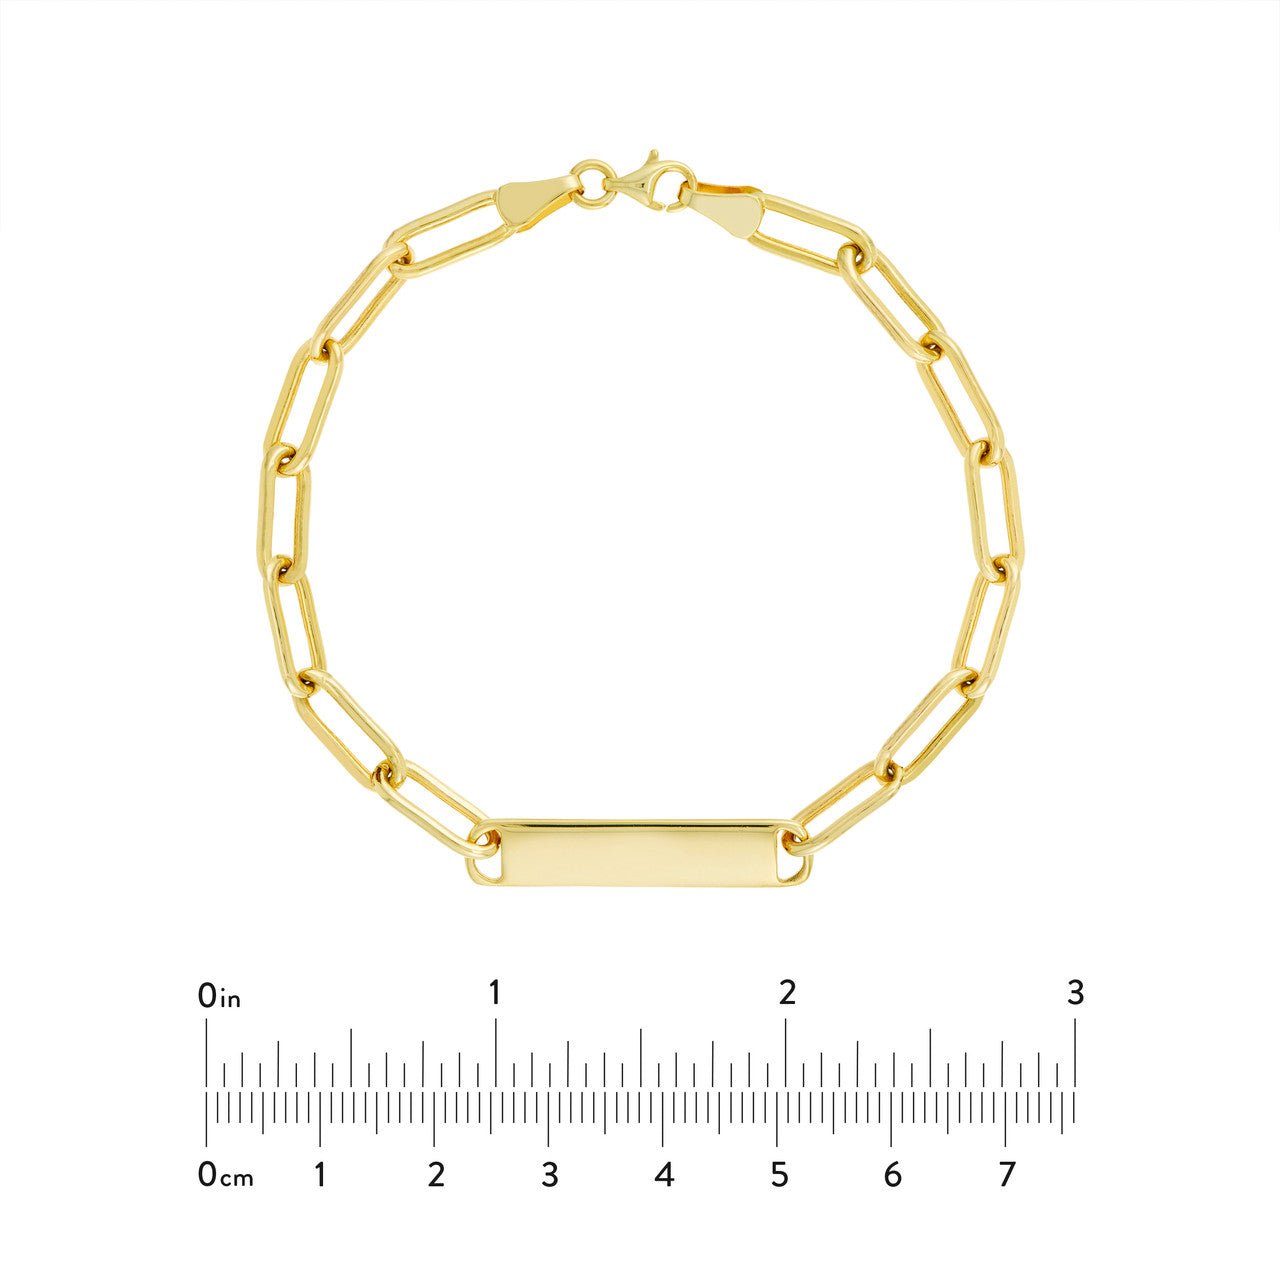 14kt yellow gold/perspective